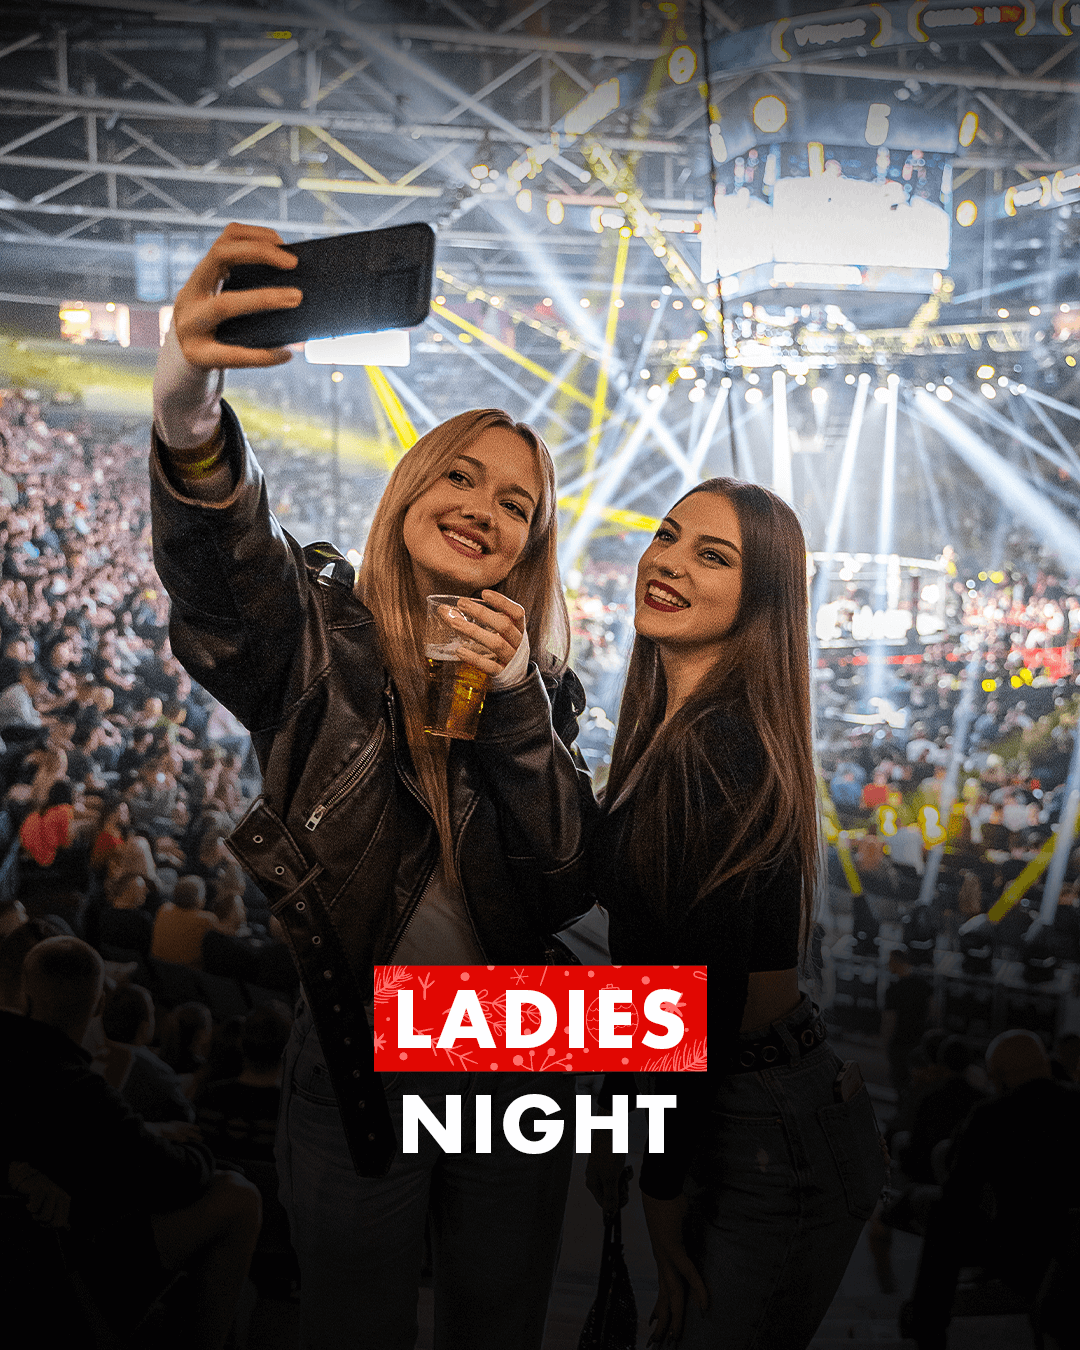 LADIES' NIGHT OUT